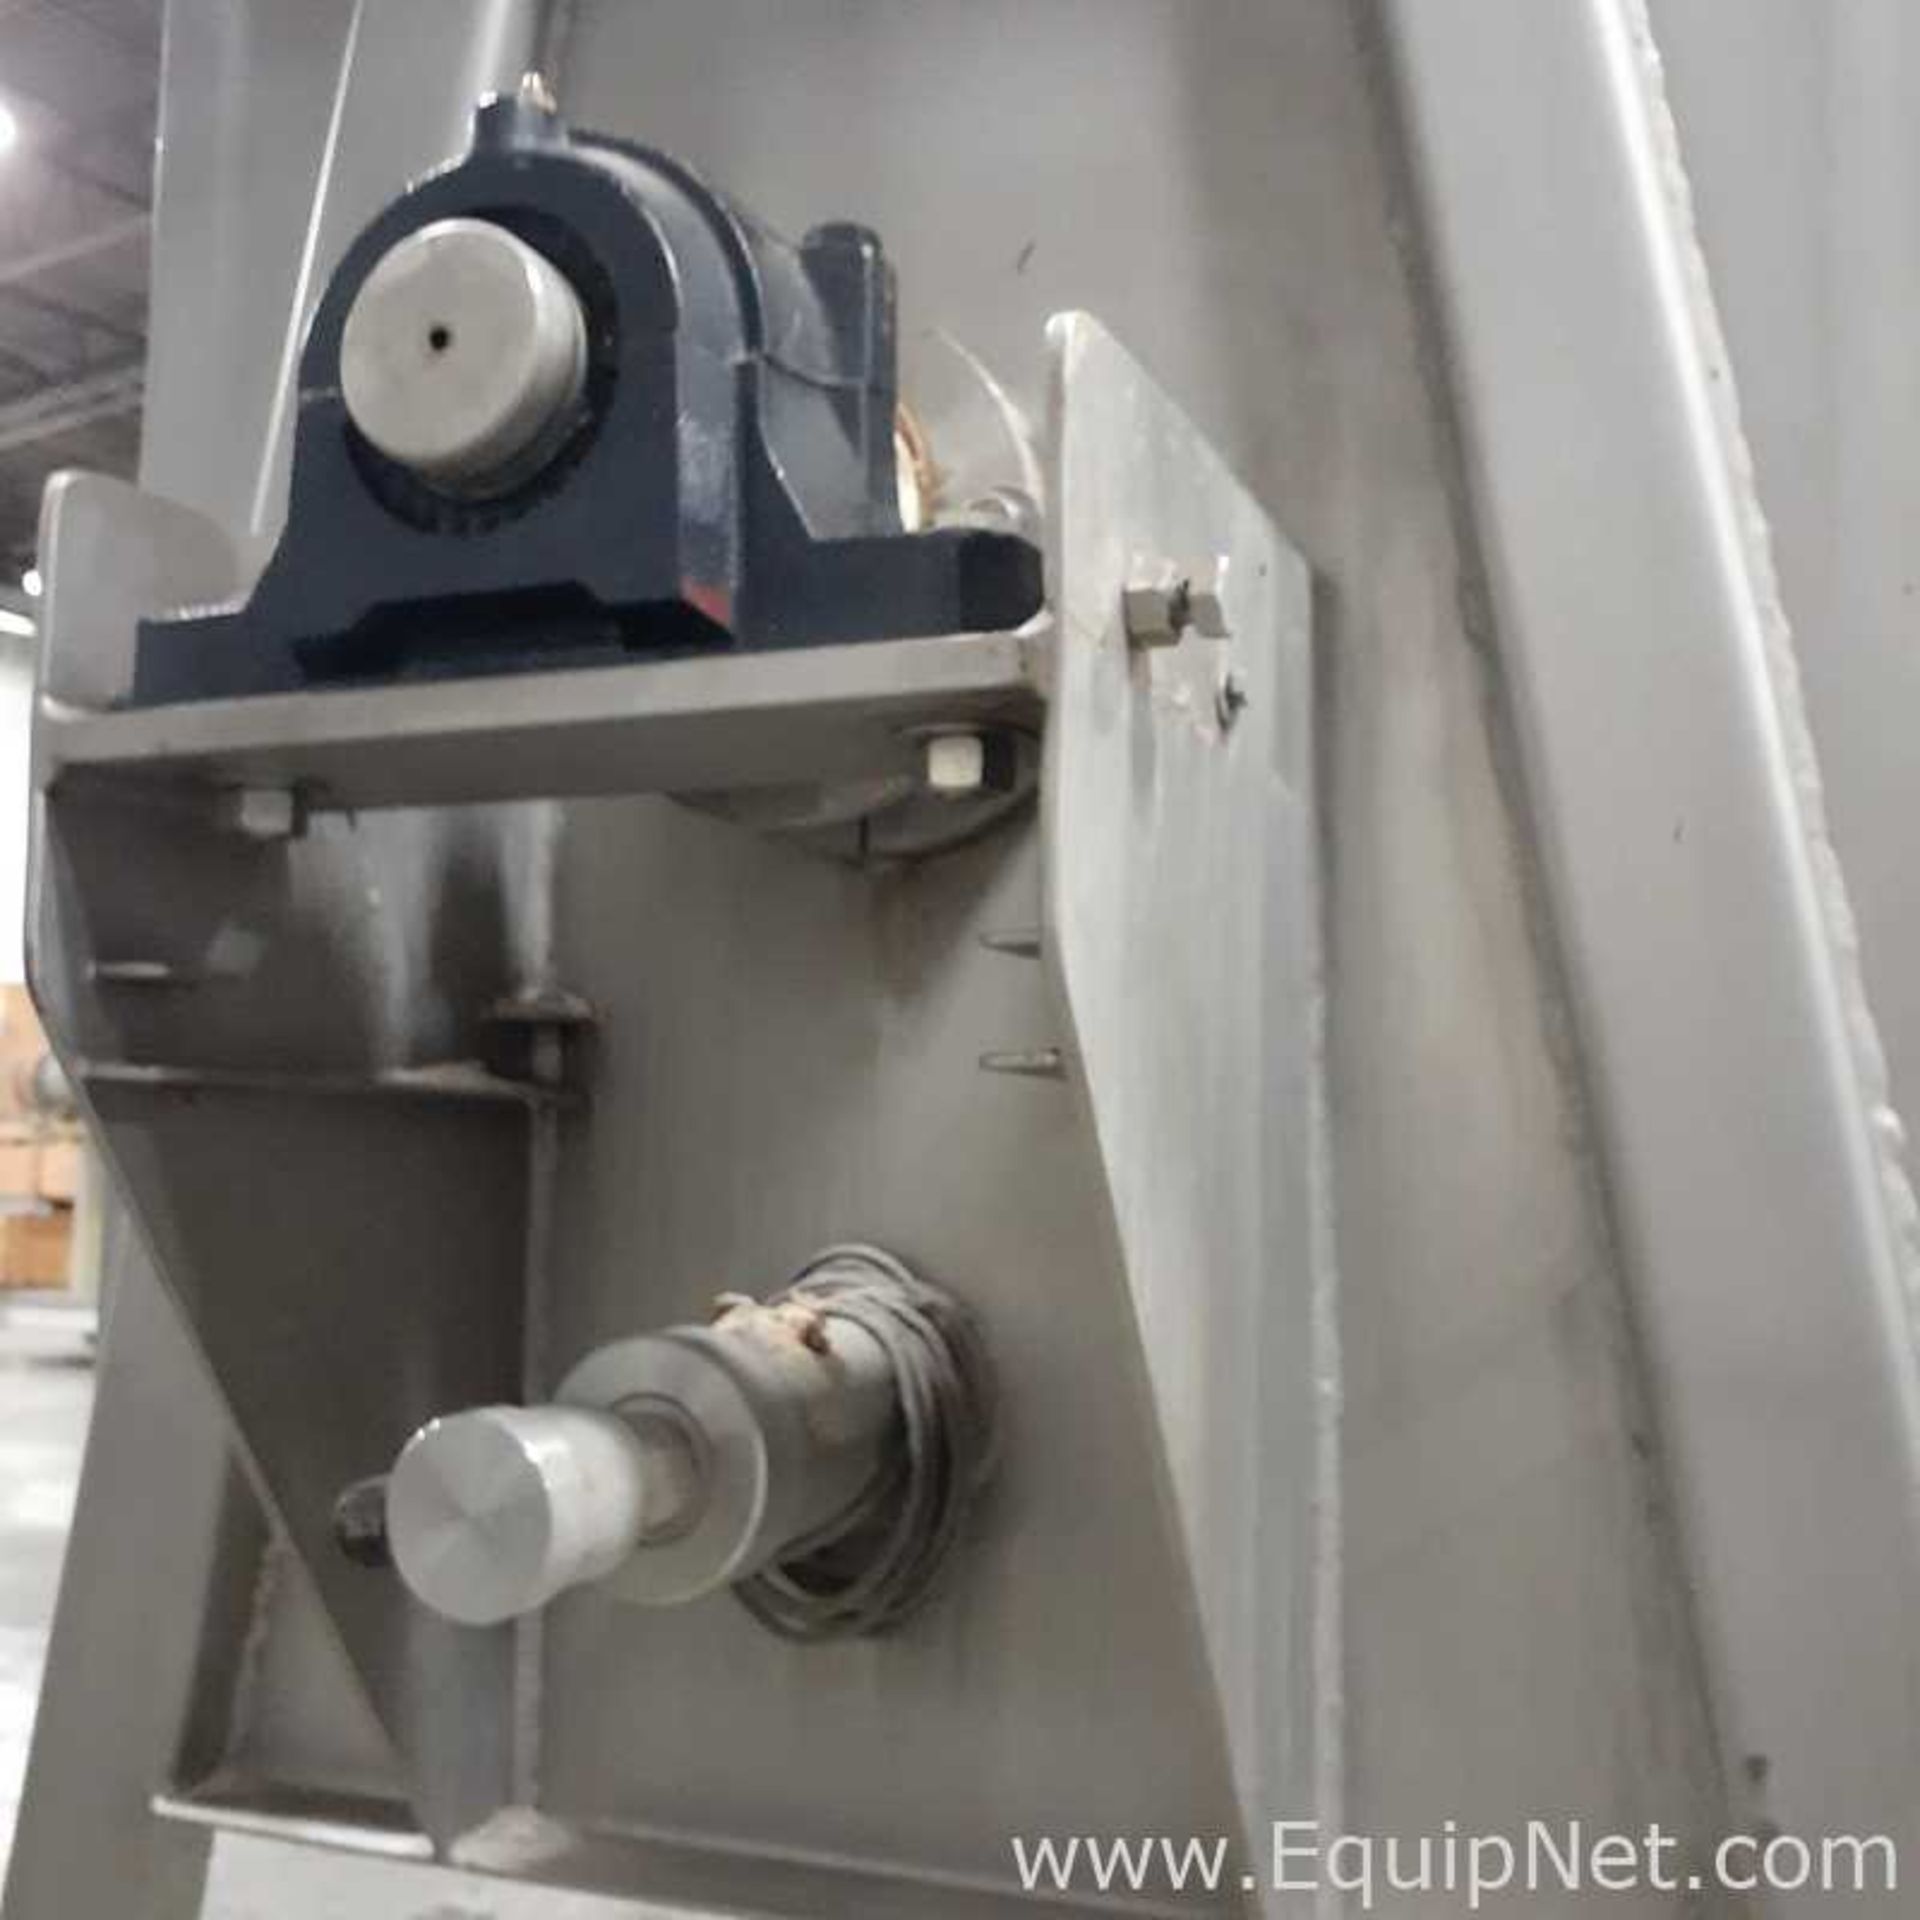 A and M Process Equipment LTD. 20 Cu. Ft. Stainless Steel Ribbon Blender - Image 17 of 23